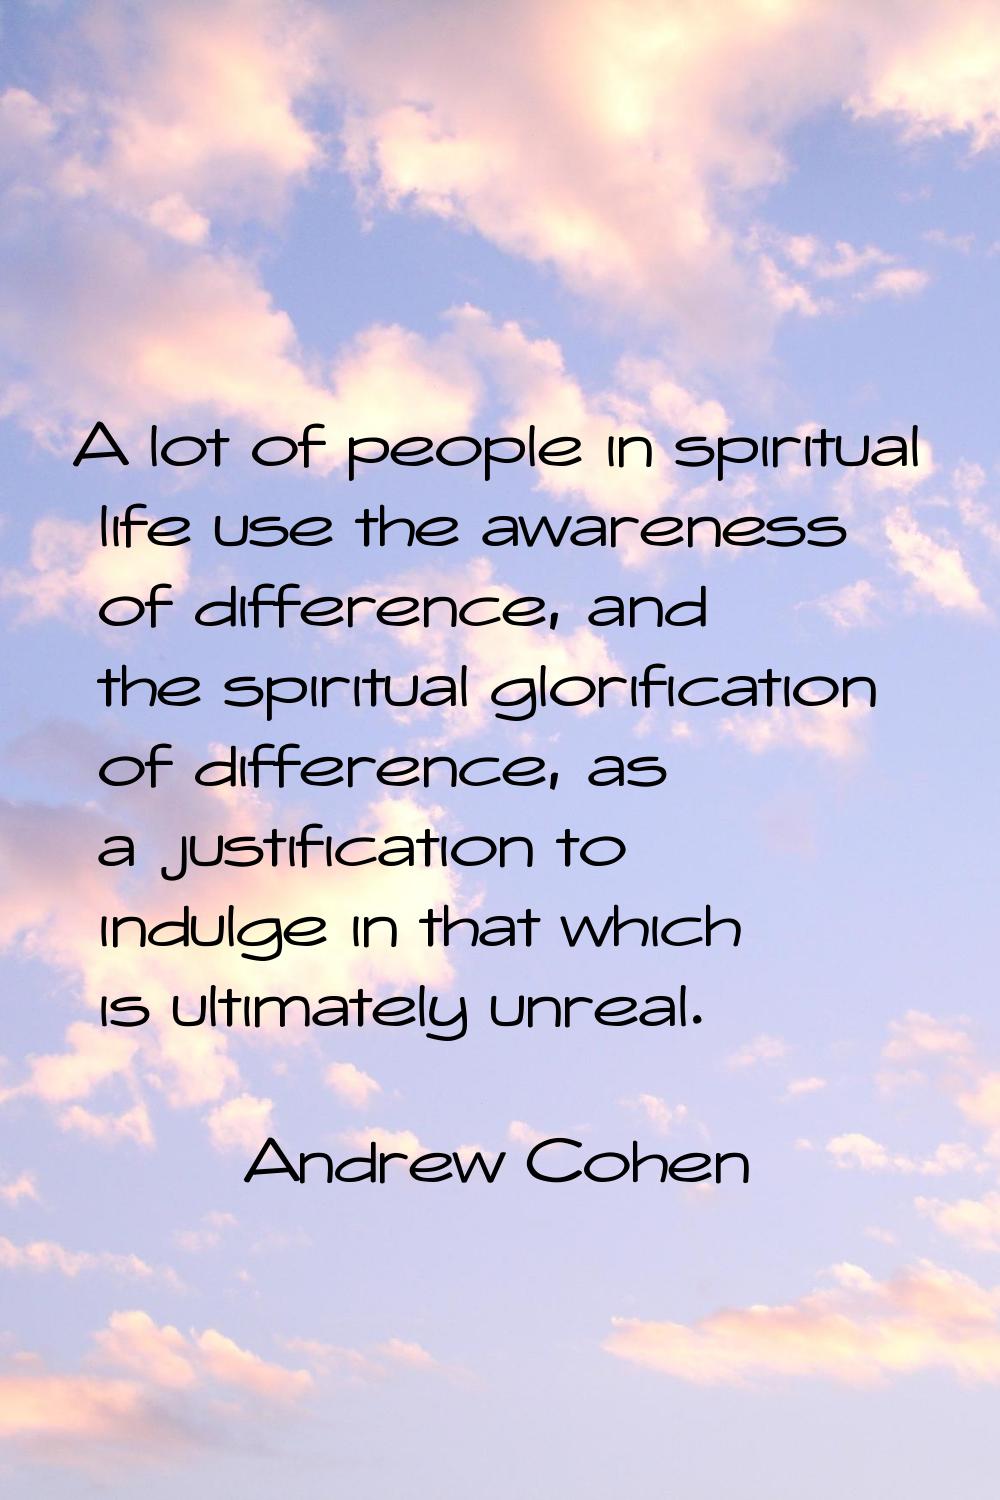 A lot of people in spiritual life use the awareness of difference, and the spiritual glorification 